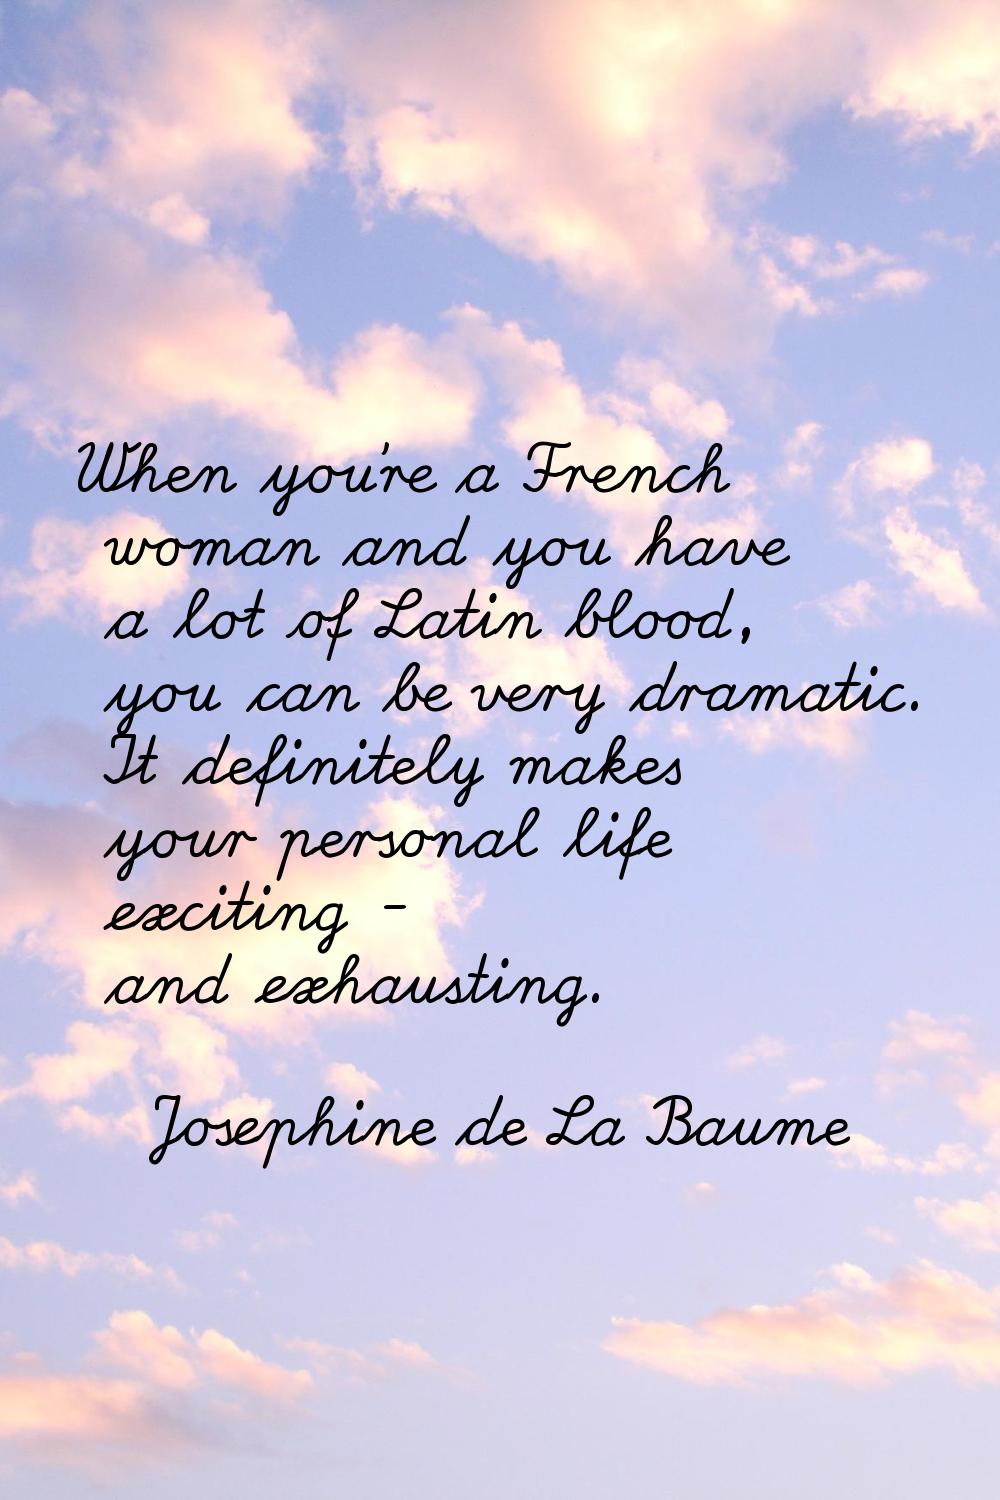 When you're a French woman and you have a lot of Latin blood, you can be very dramatic. It definite